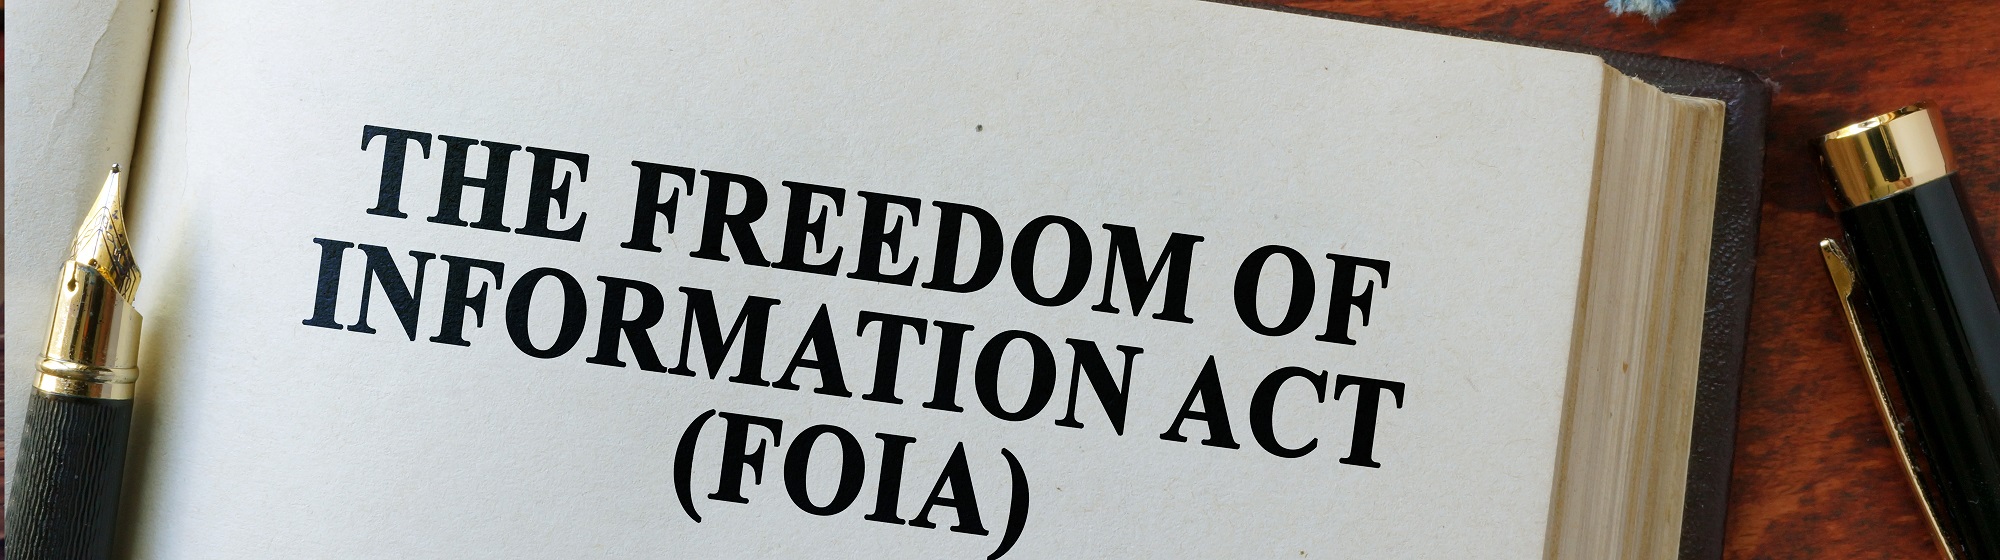 Book with text "Freedom of Information Act (FOIA)"